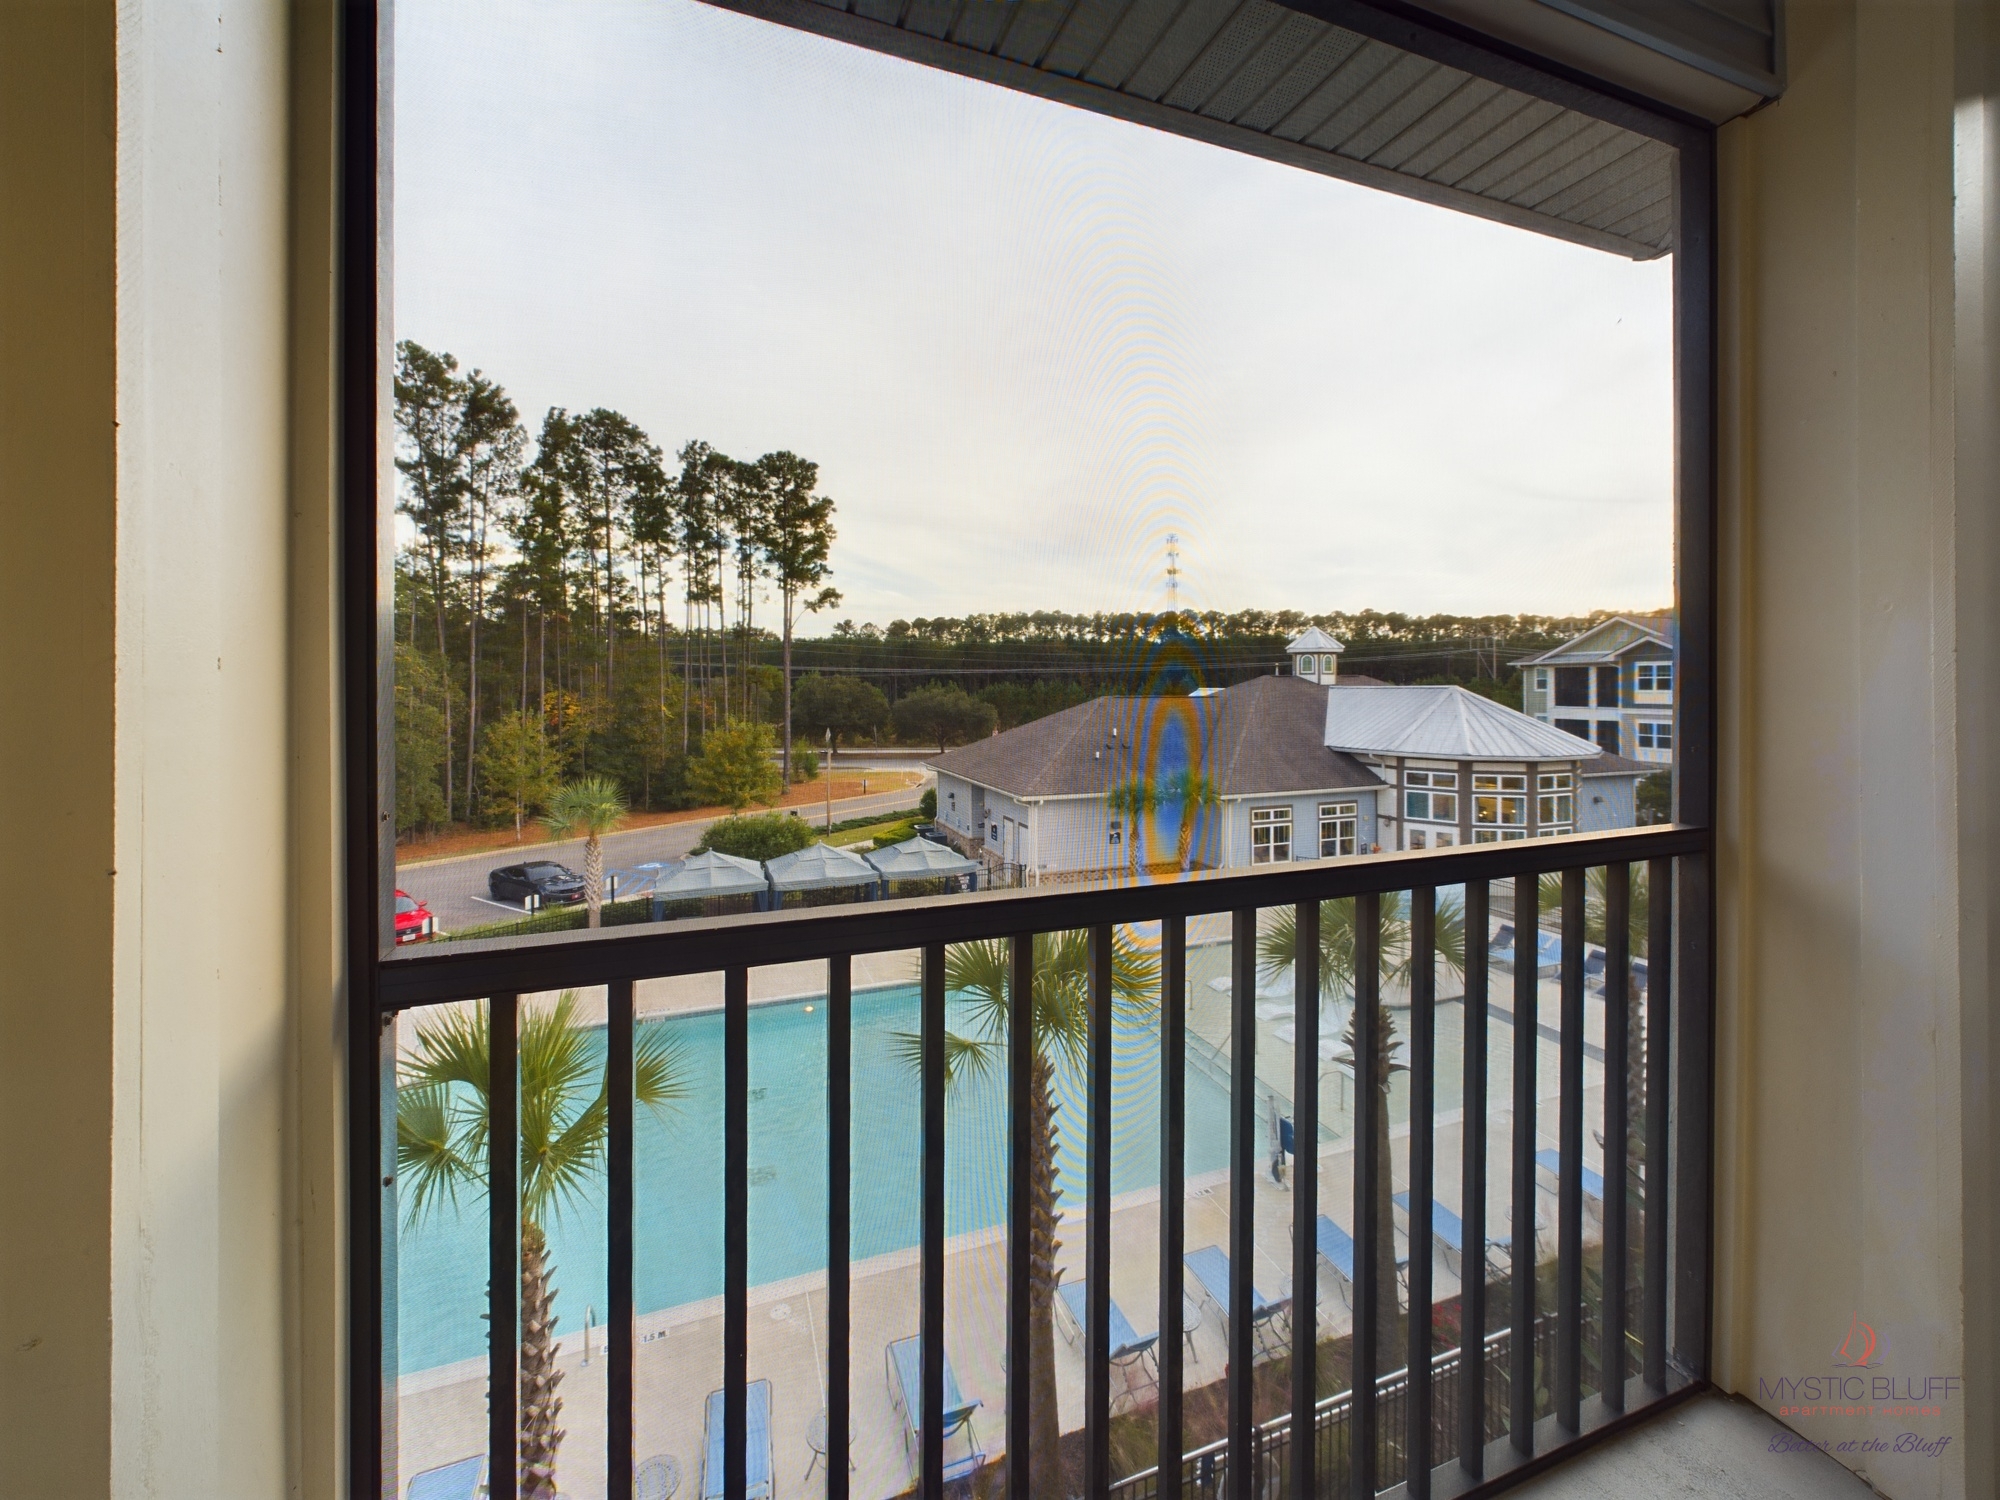 A view of a pool from a balcony in one bedroom apartments.